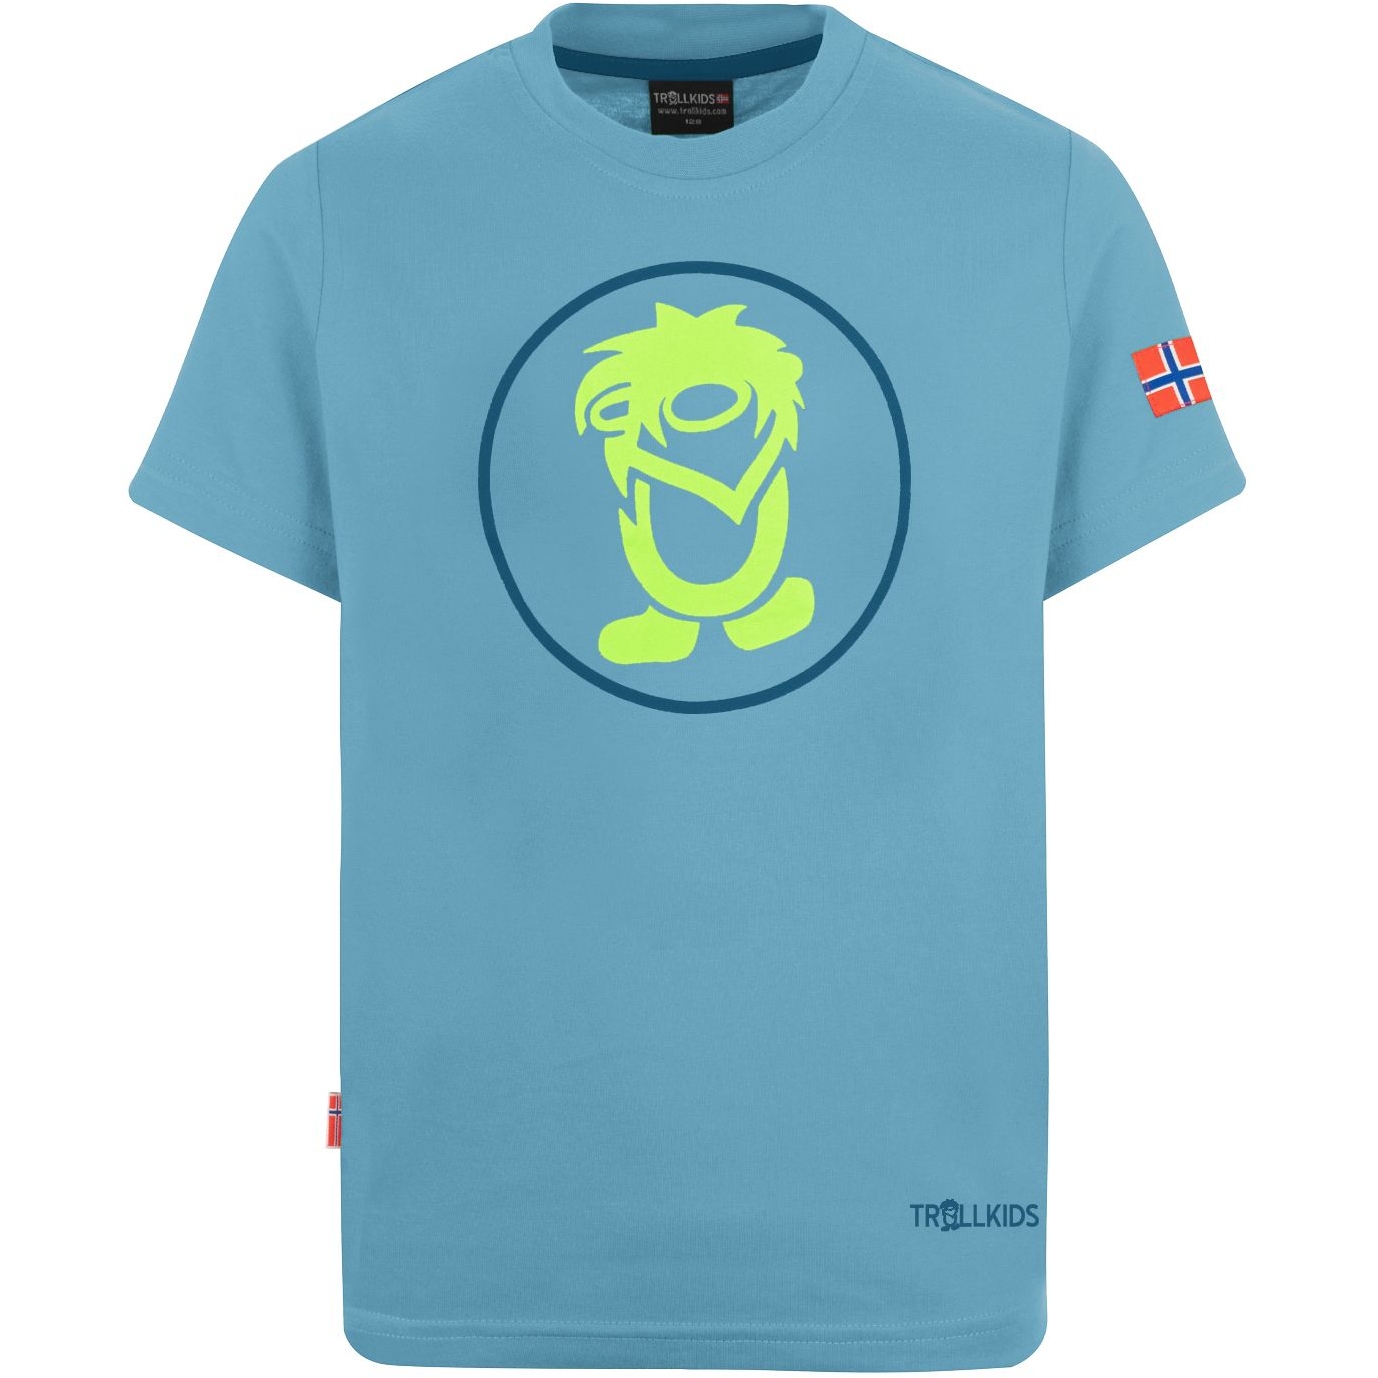 Image of Trollkids Troll Kids T-Shirt - Dolphin Blue/Lime